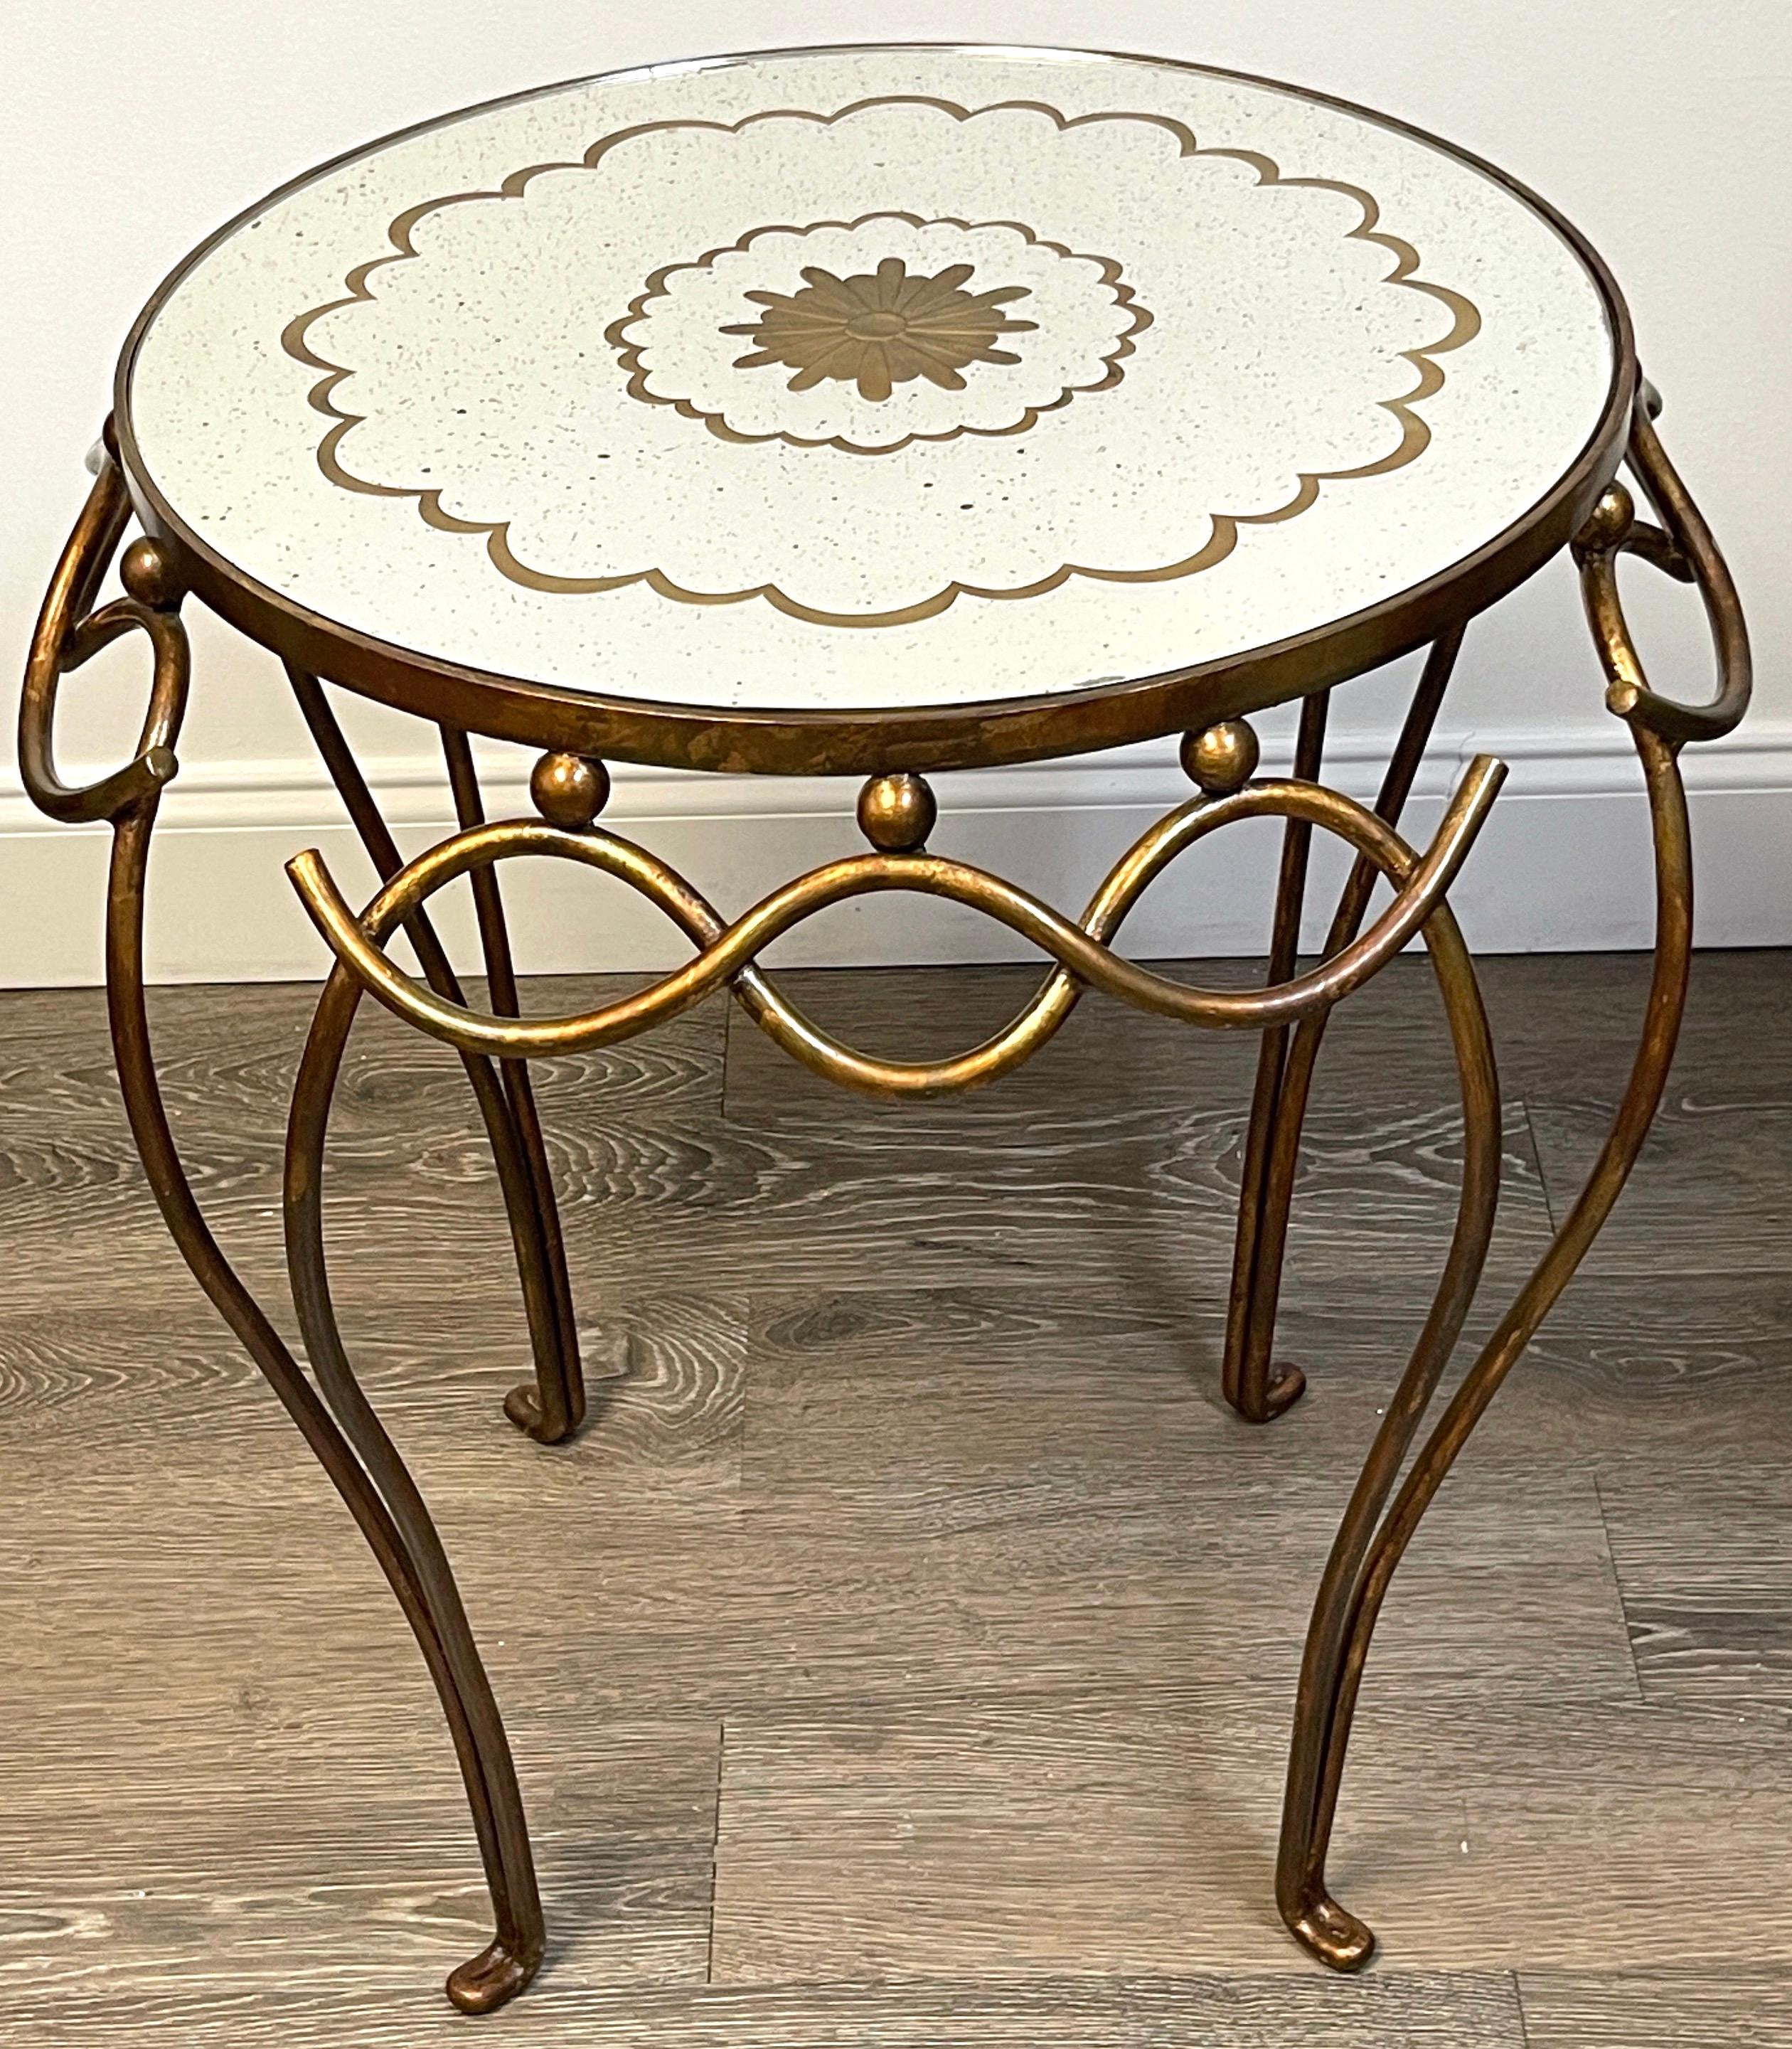 French Modern Gilt & Patinated Verre Églomisé side table, 
Style of René Drouet (1899-1993)
France, 20th Century
A beautiful stylish side/ end table, of circular form with inset (removable) Verre Églomisé Mirror decorated with gilt stylized